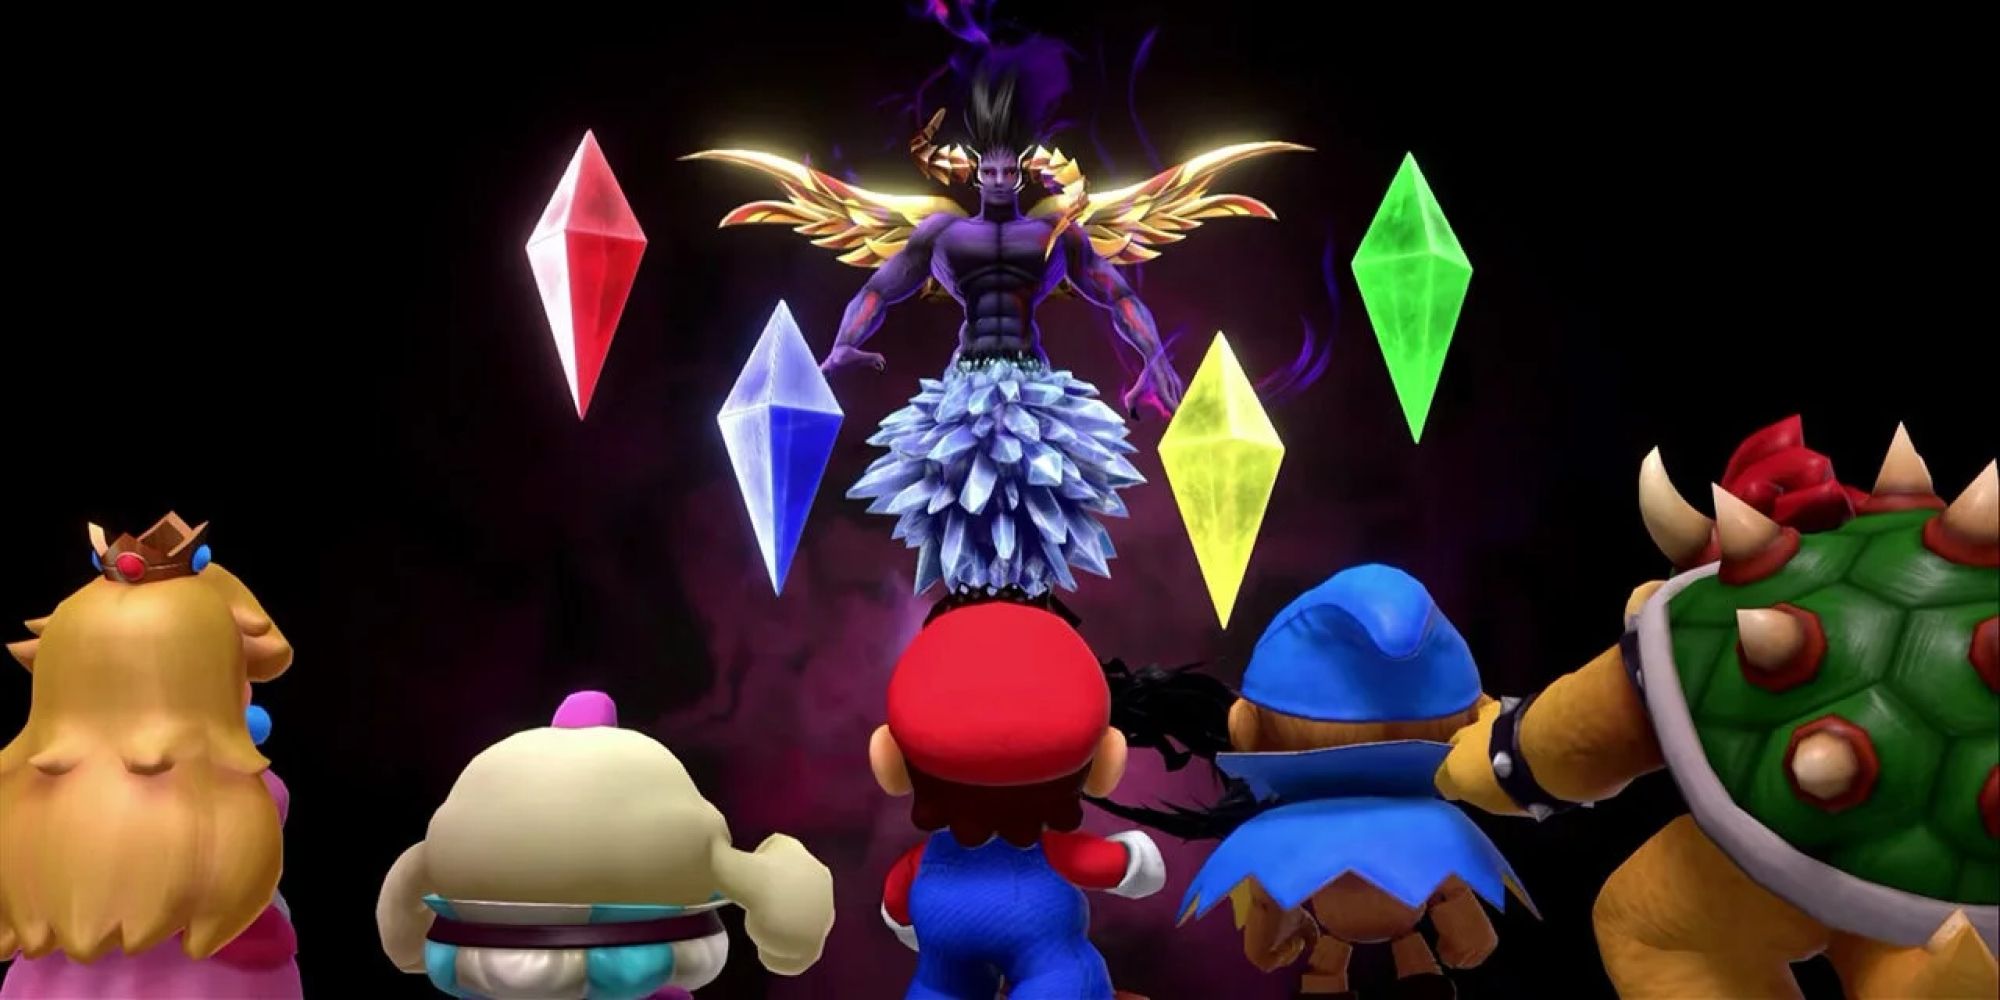 Culex 3D from Super Mario RPG in front of Geno, Peach, Mallow, Bowser, and Mario